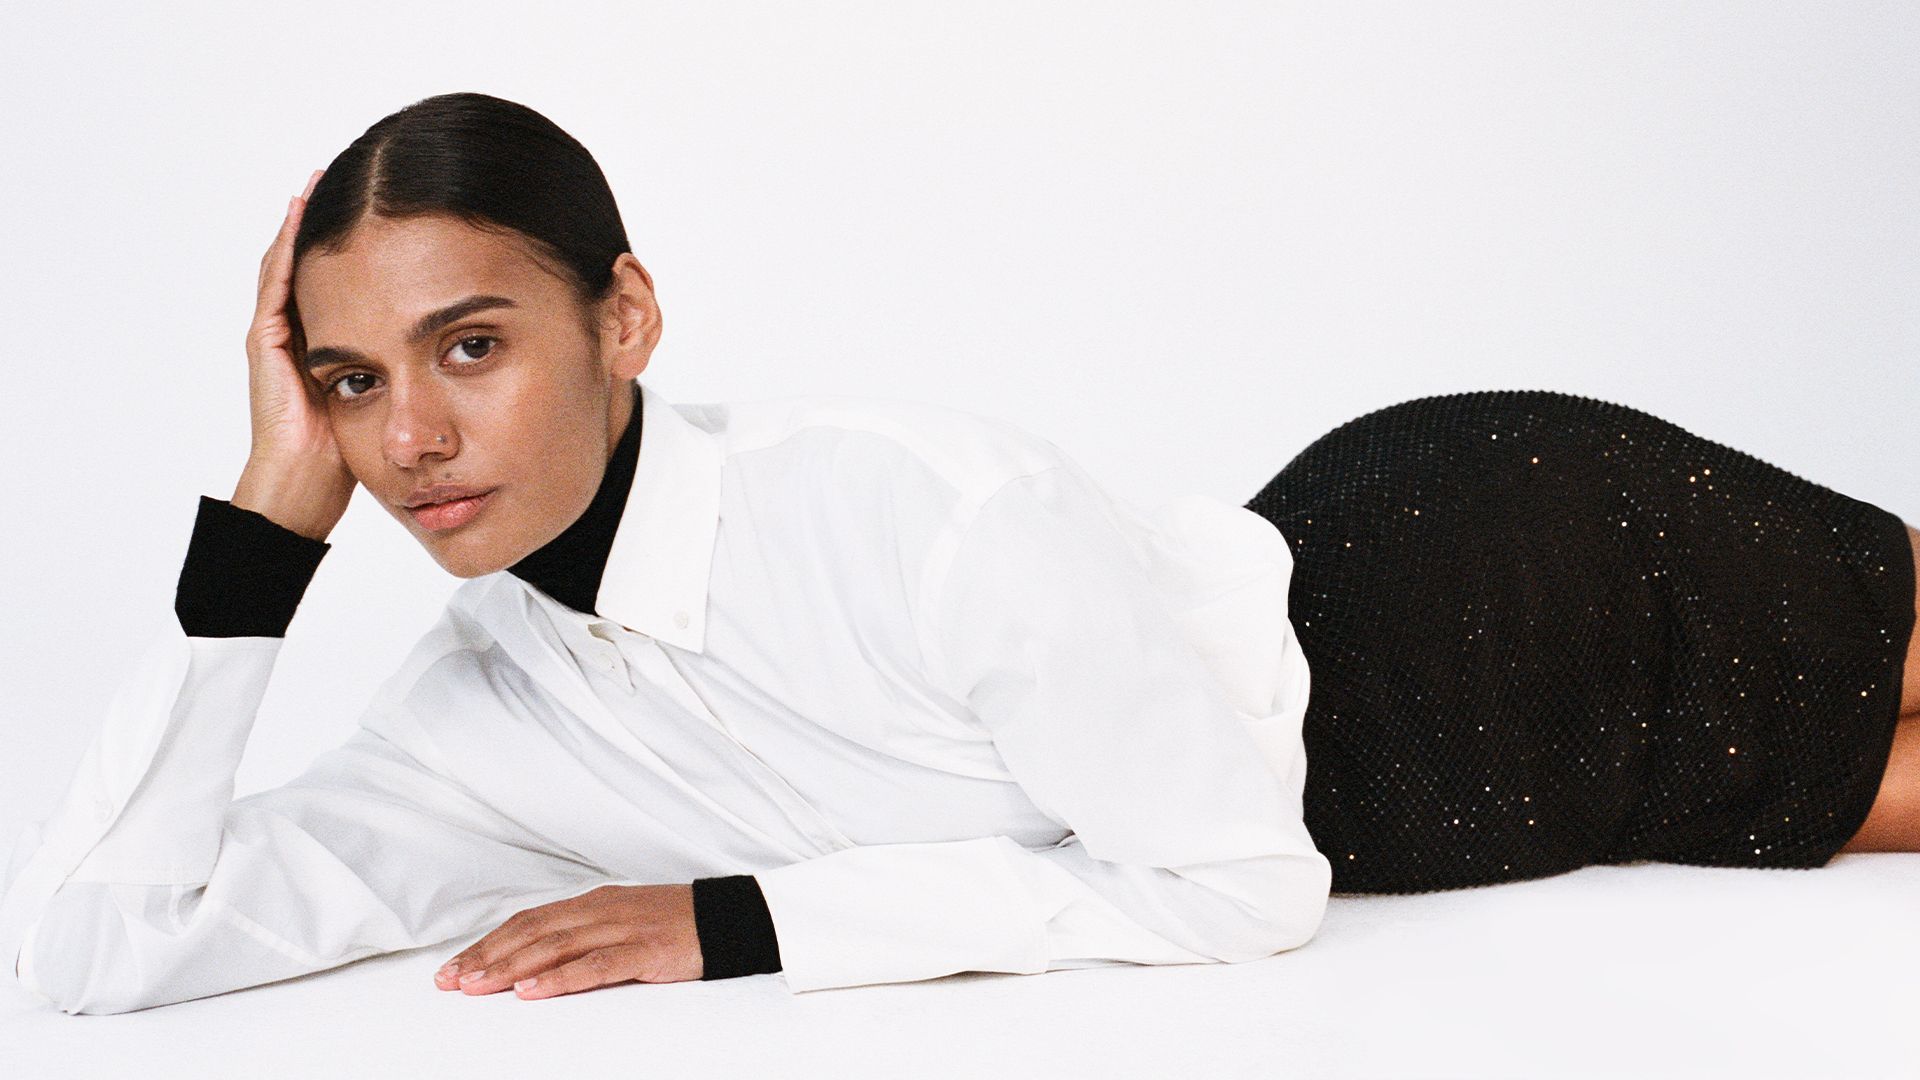 Woman lying down wearing a white cotton shirt, layered with a black babywool turtleneck and sparkly black mini skirt